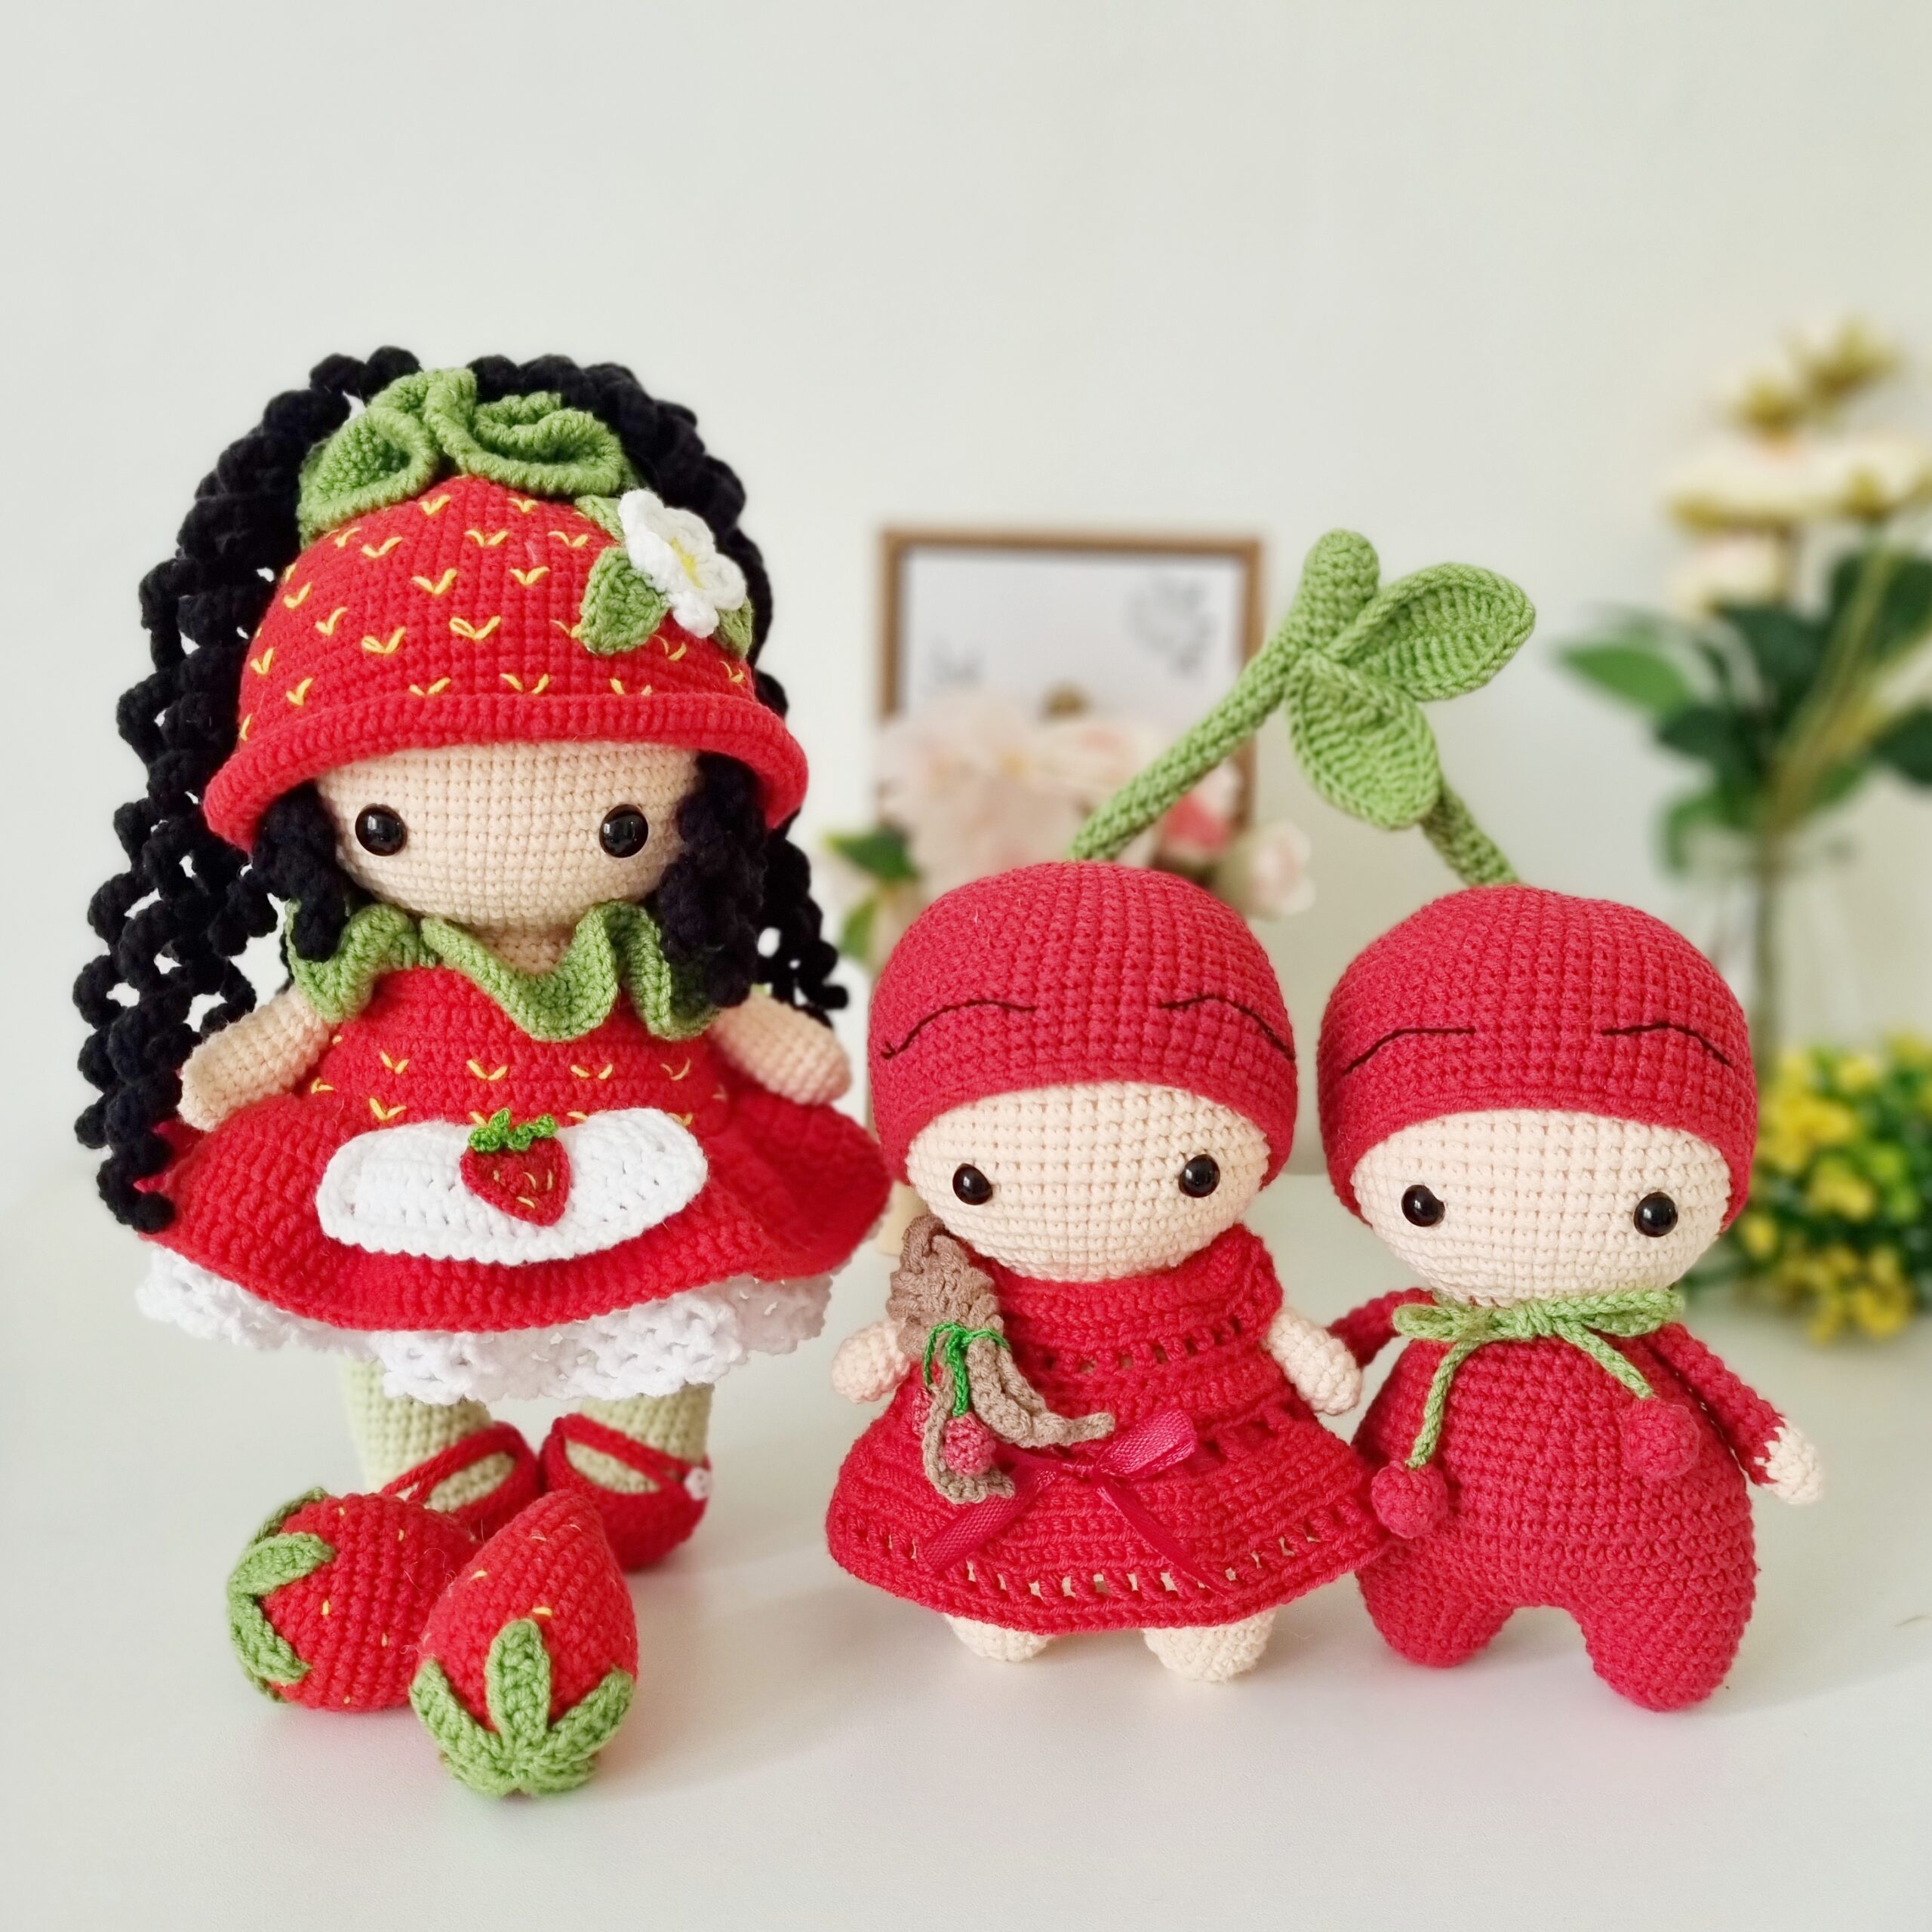 Crochet pattern 2 in 1: Doll in strawberry dress and hat and